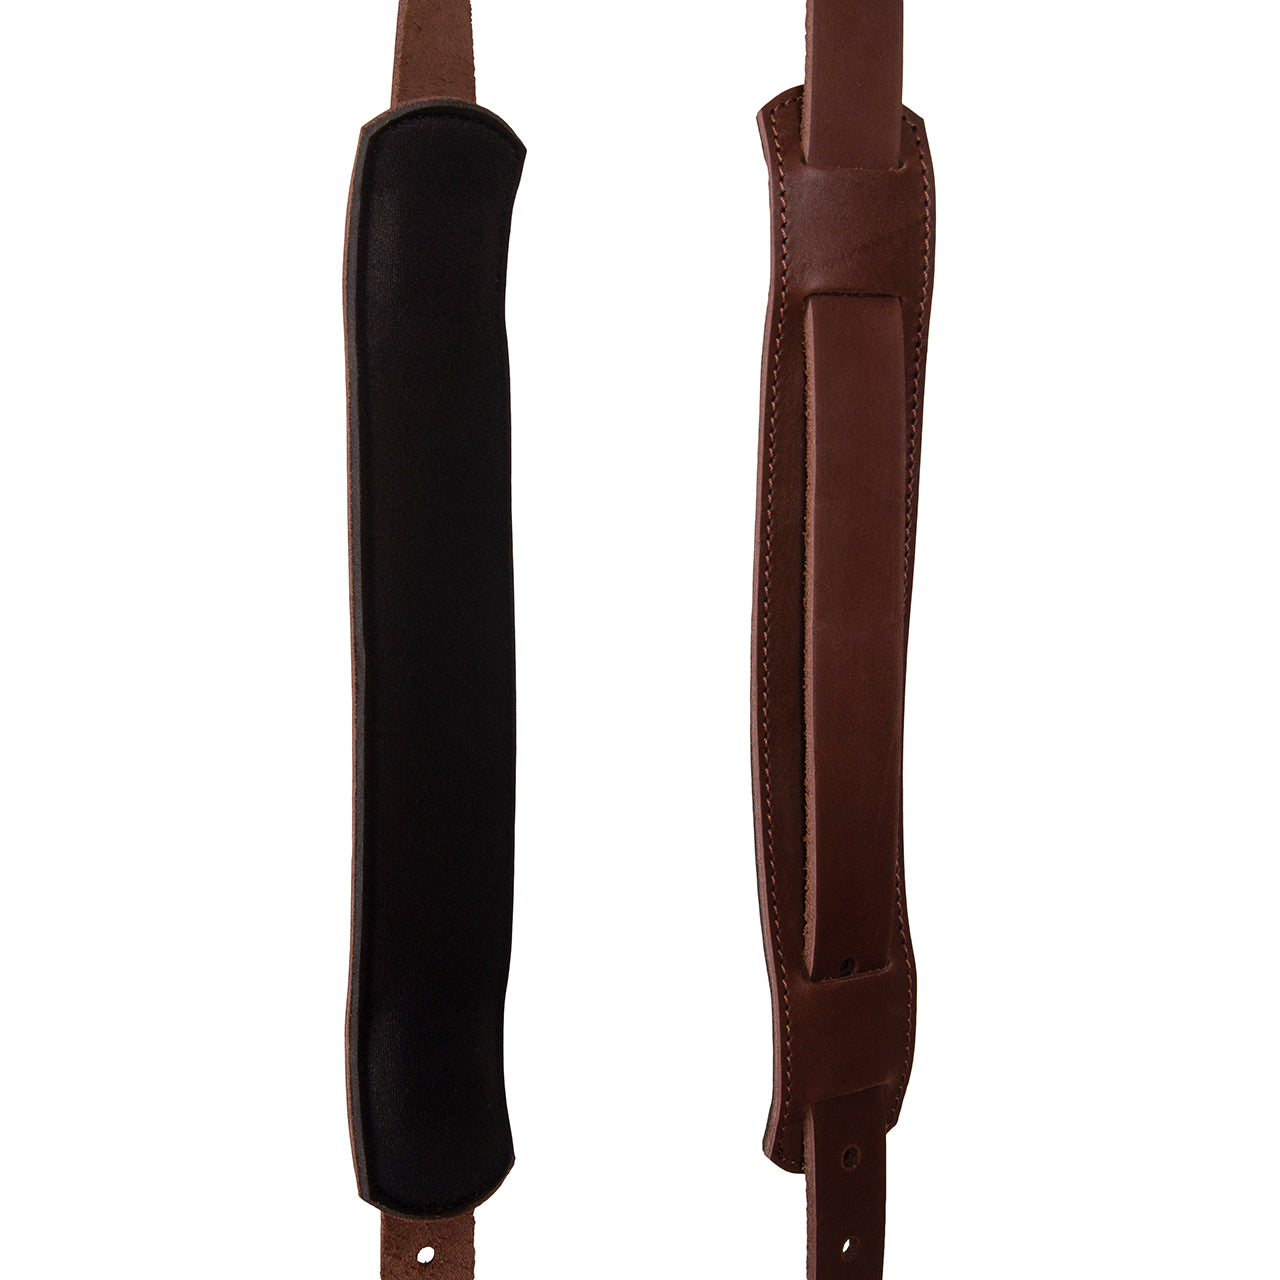 Leather Stronghold Suspension System, Comfortable Padded and Fully-Adjustable Padded Leather Tool Belt Suspenders.